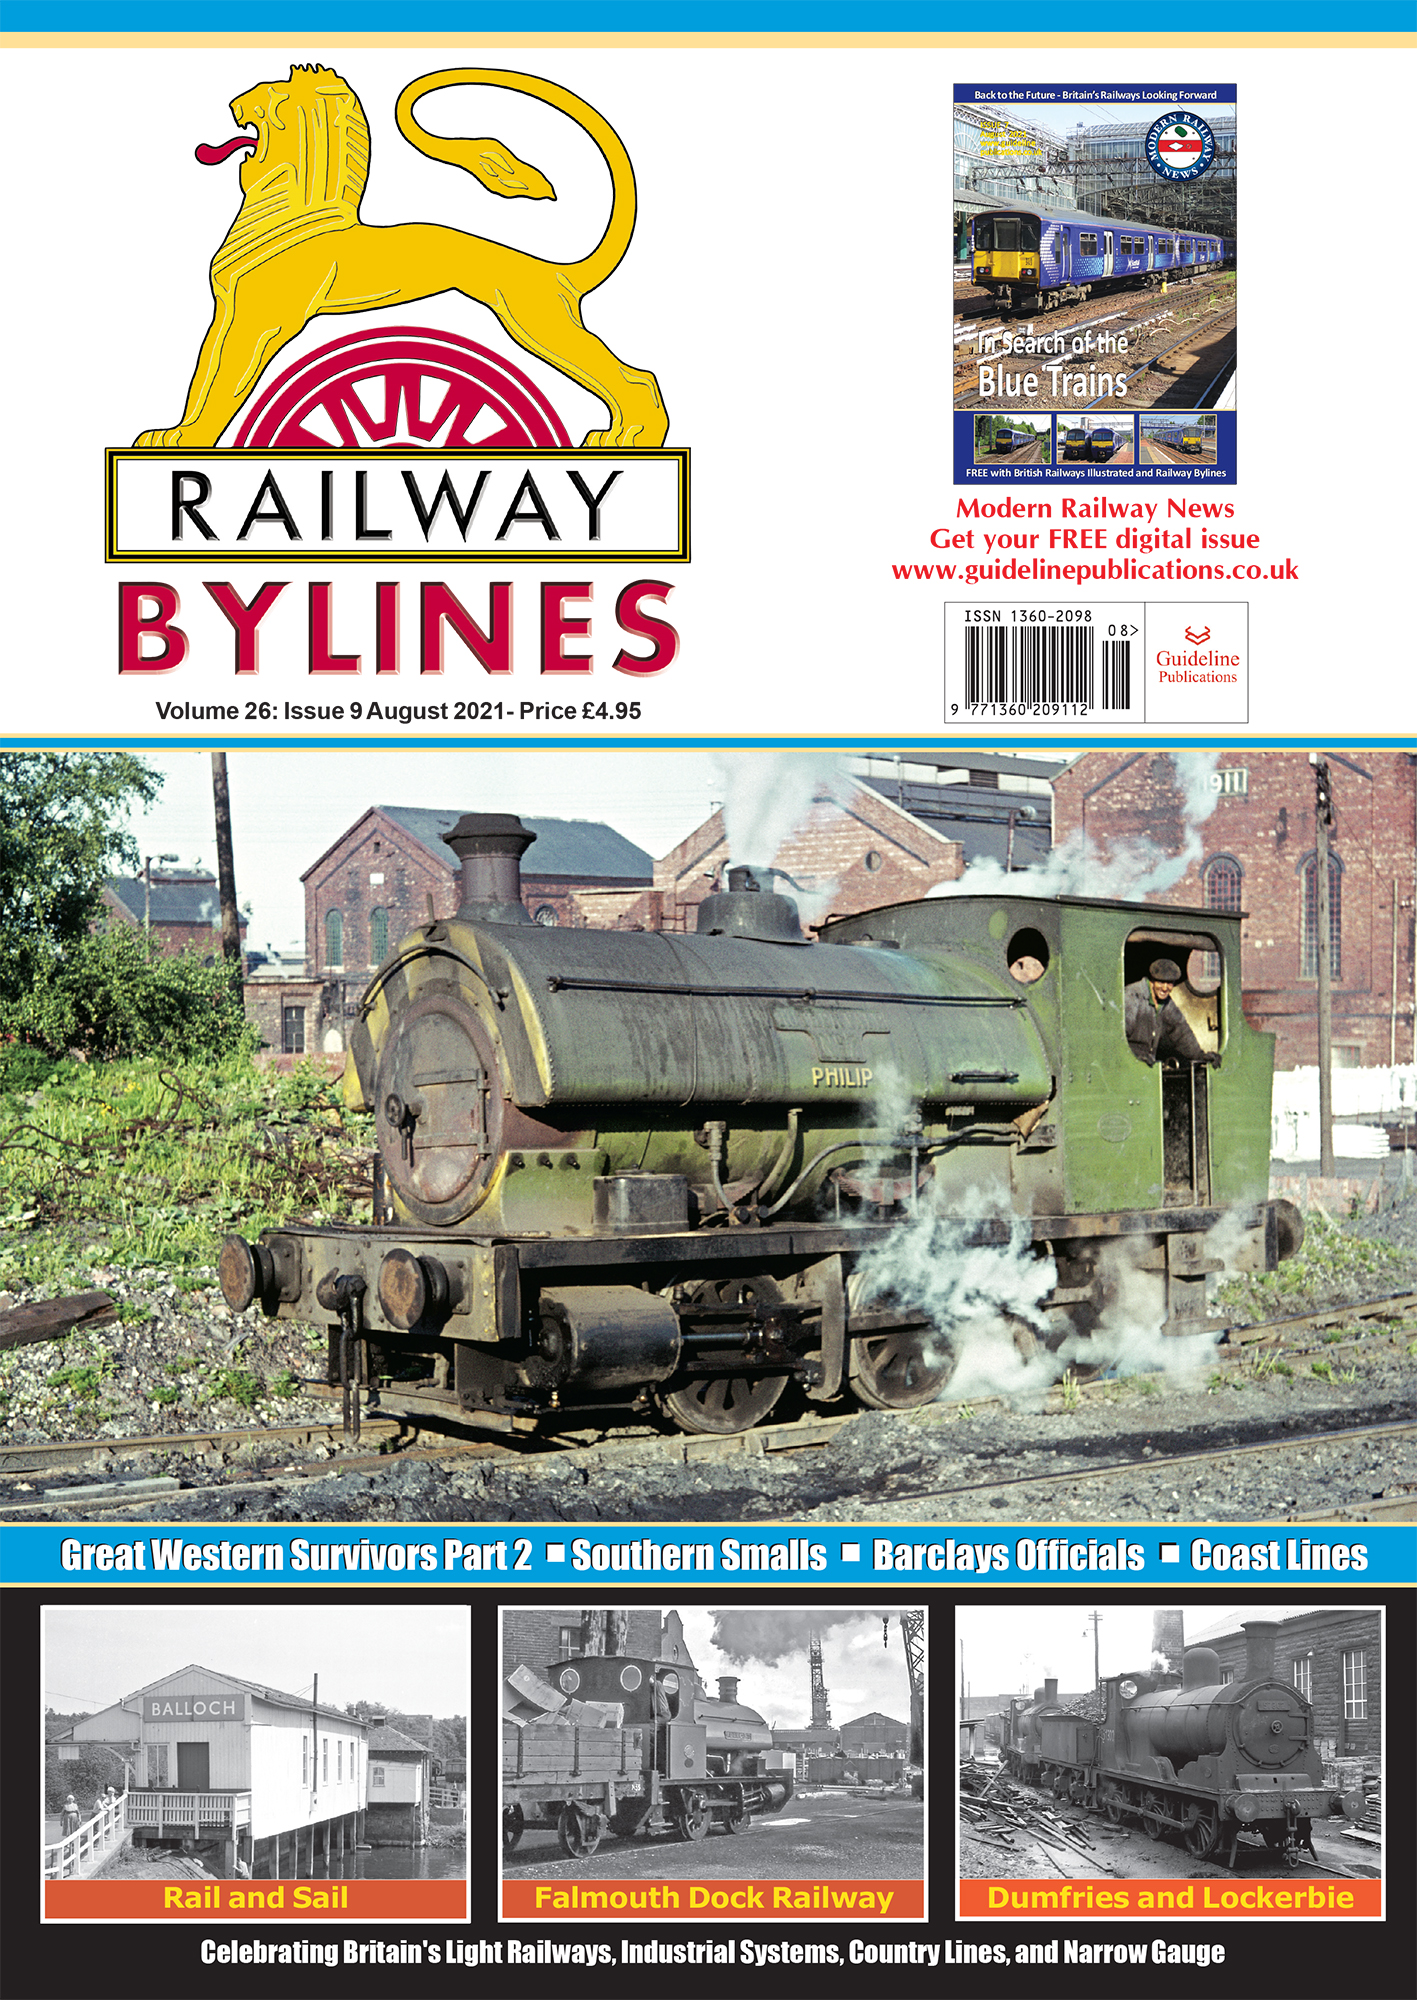 Guideline Publications Railway Bylines  vol 26 - issue 09 August 2021 